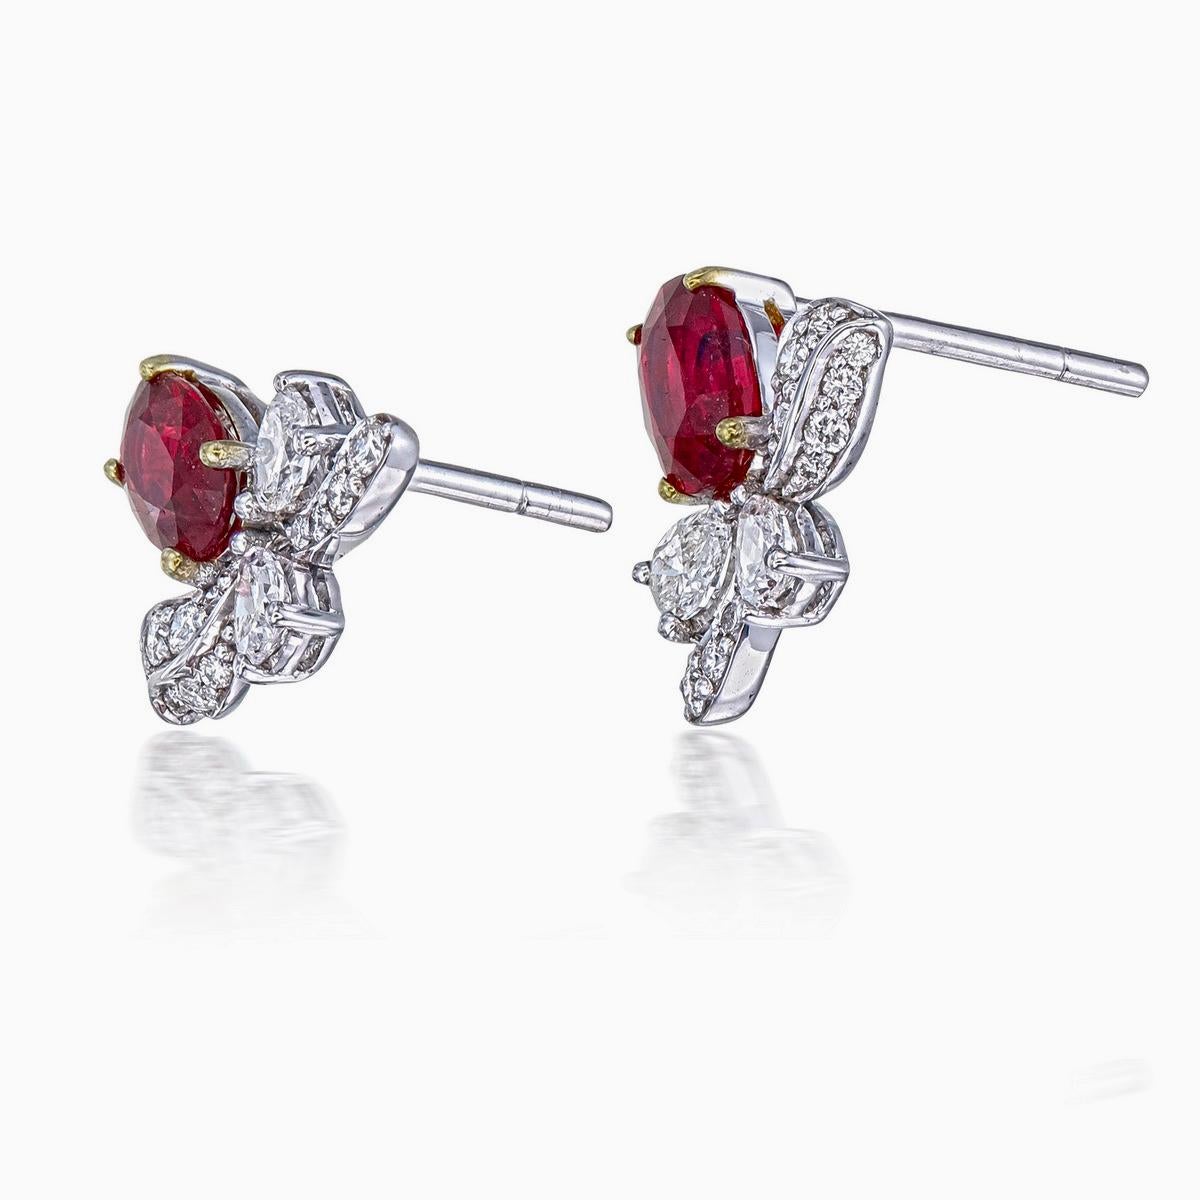 A pair of fine modern ruby and diamond earrings made in 18 Karat gold. This pair of earrings embraces minimalism with it's simple floral design while still displaying elegance; a great fit for lifestyle wear.

- There are two center oval Pigeon